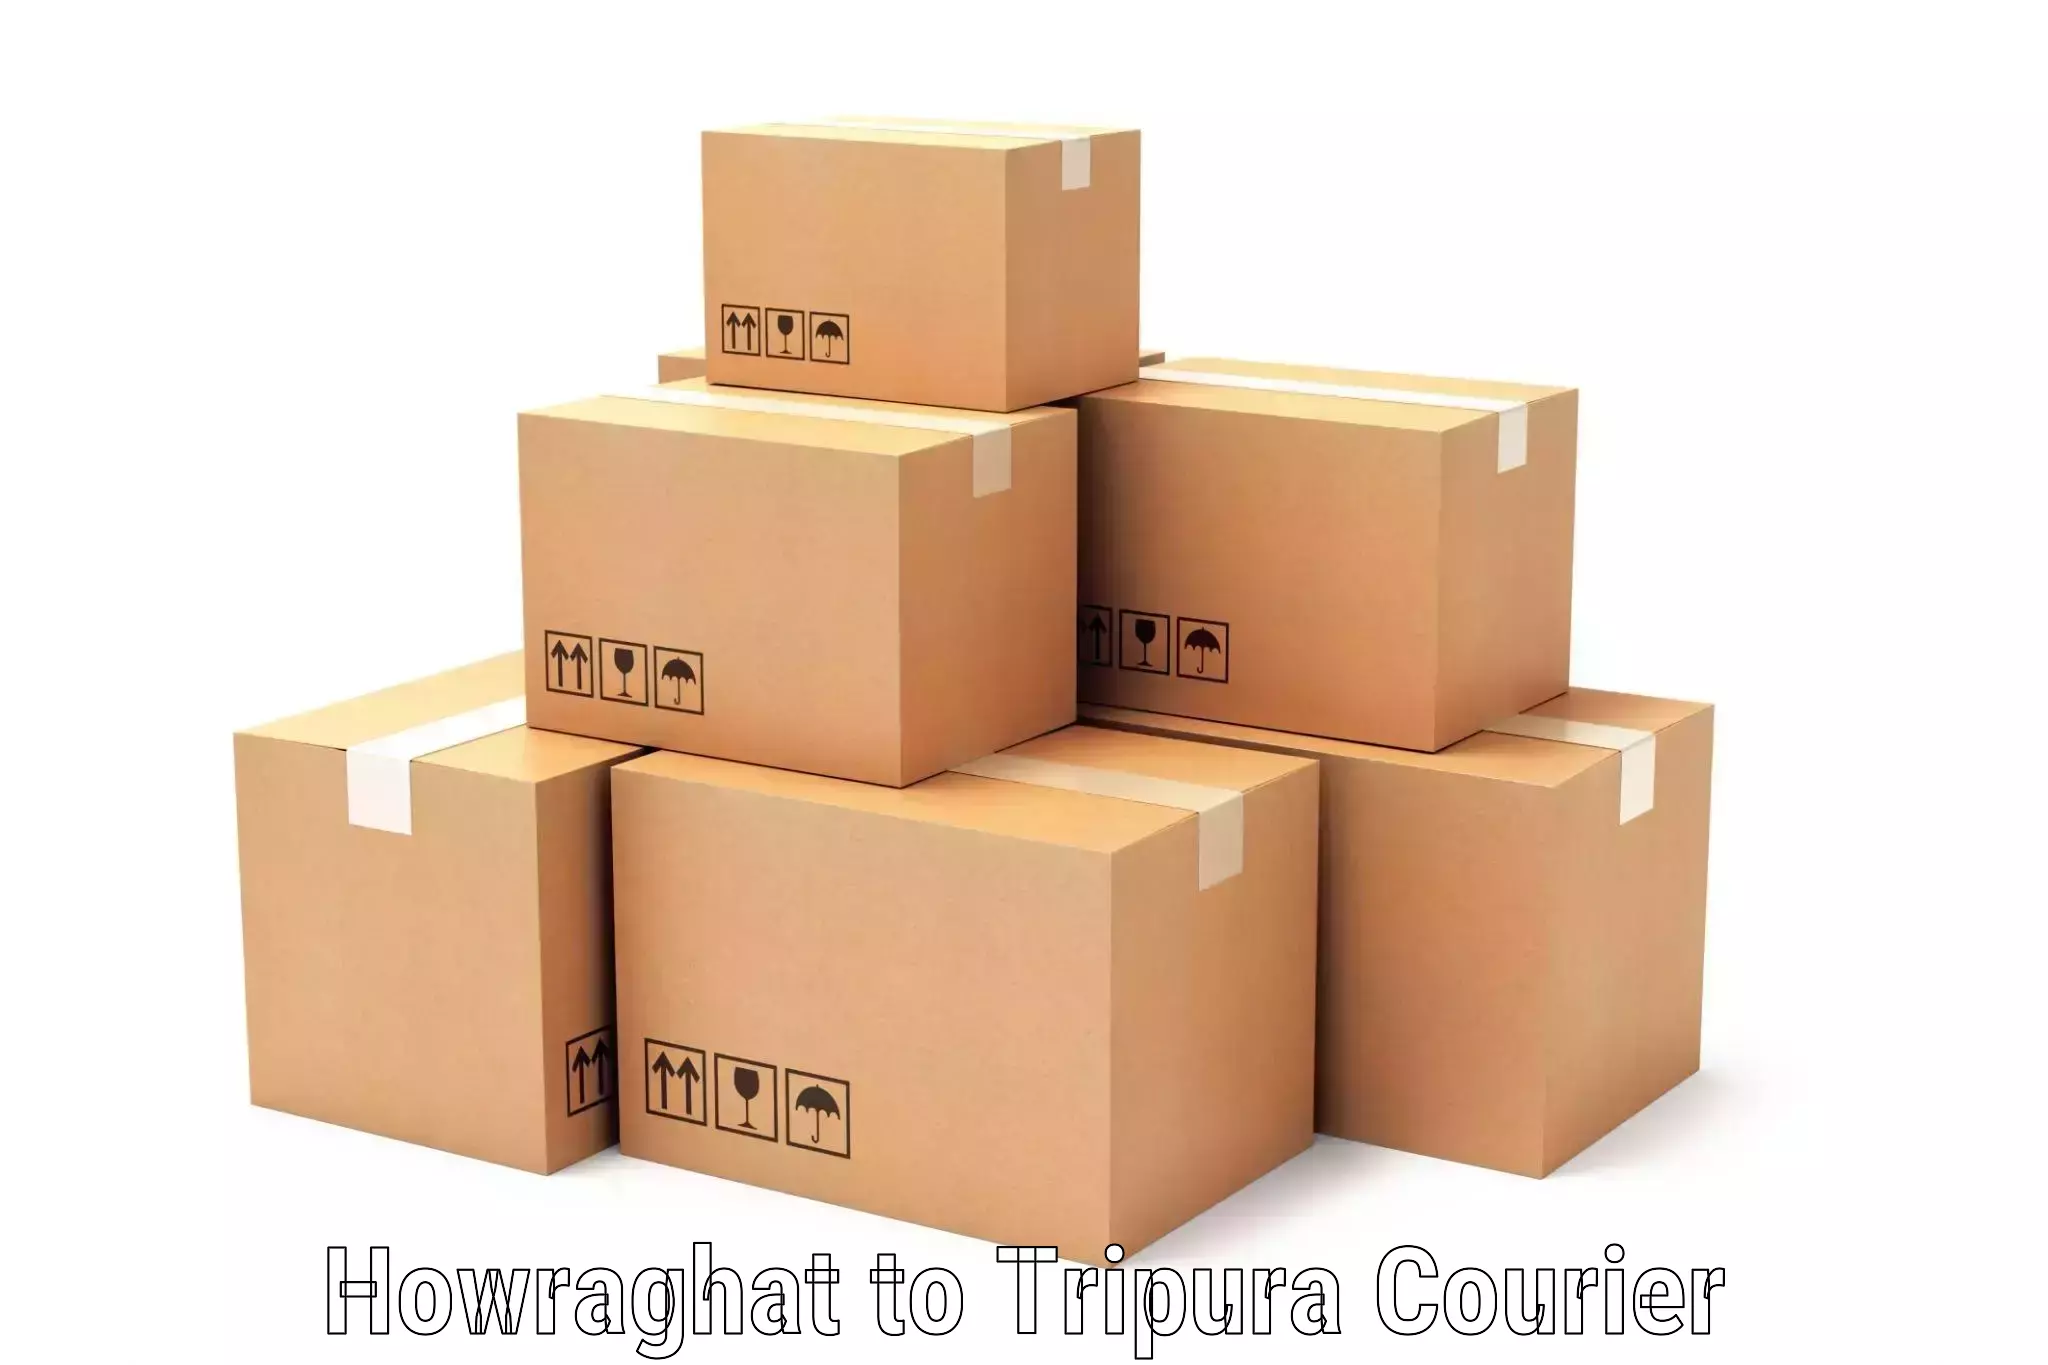 Quality courier partnerships Howraghat to Ambassa